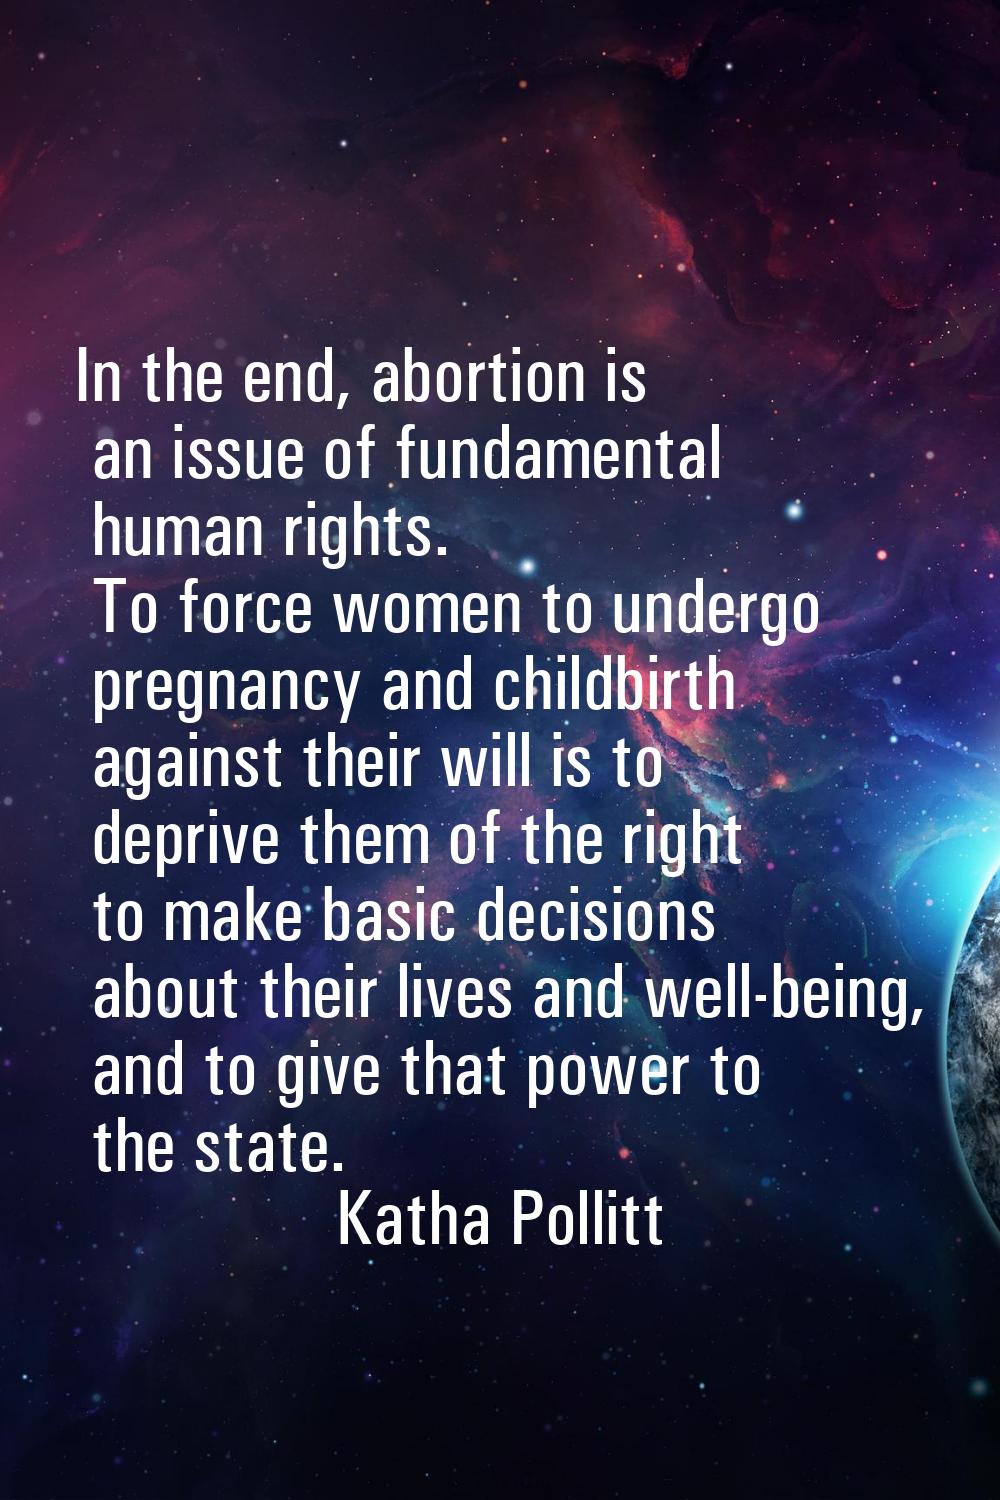 In the end, abortion is an issue of fundamental human rights. To force women to undergo pregnancy a